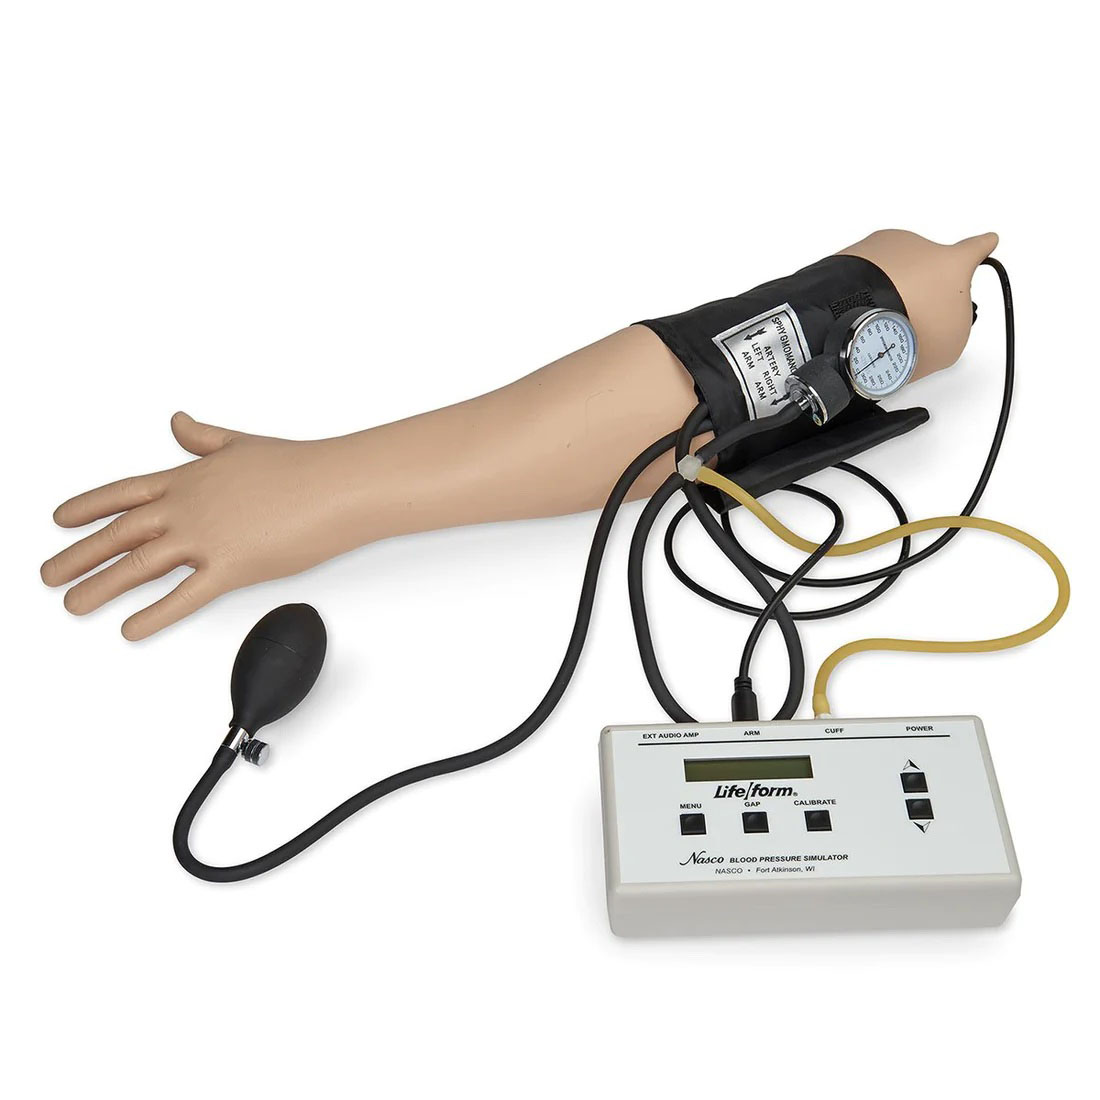 Deluxe Blood Pressure Simulator With Amplifier/Speaker System